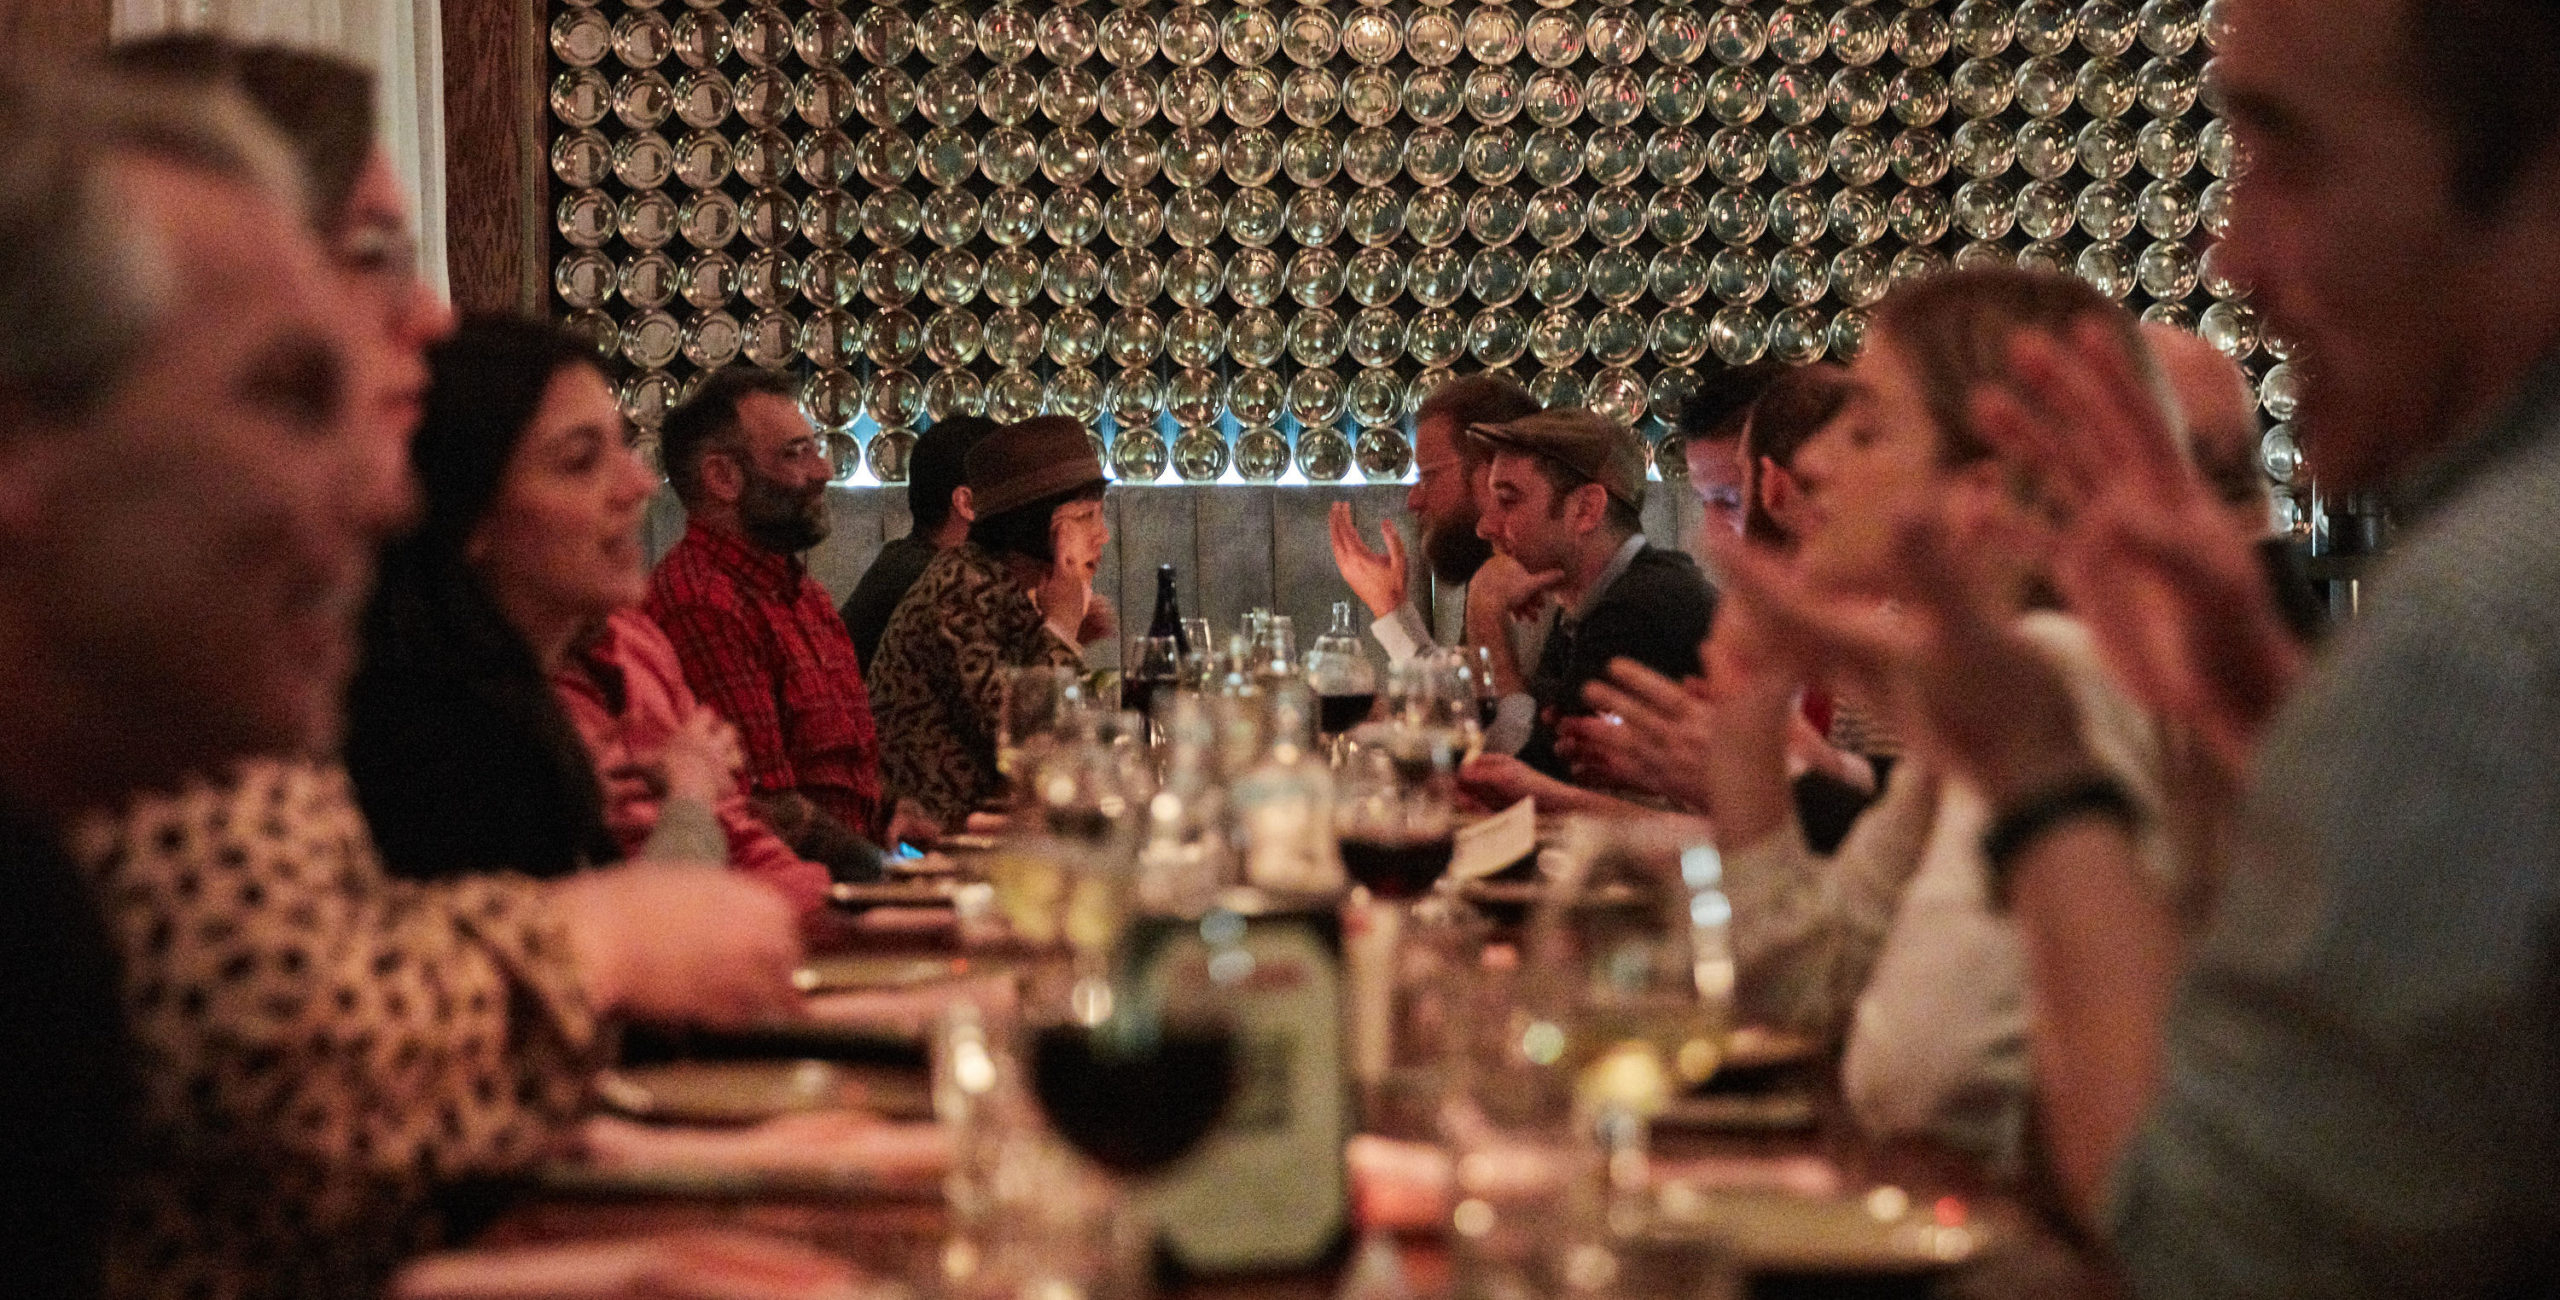 ChowNow's first-ever family meal at GupShup in NYC brought together the local restaurant industry